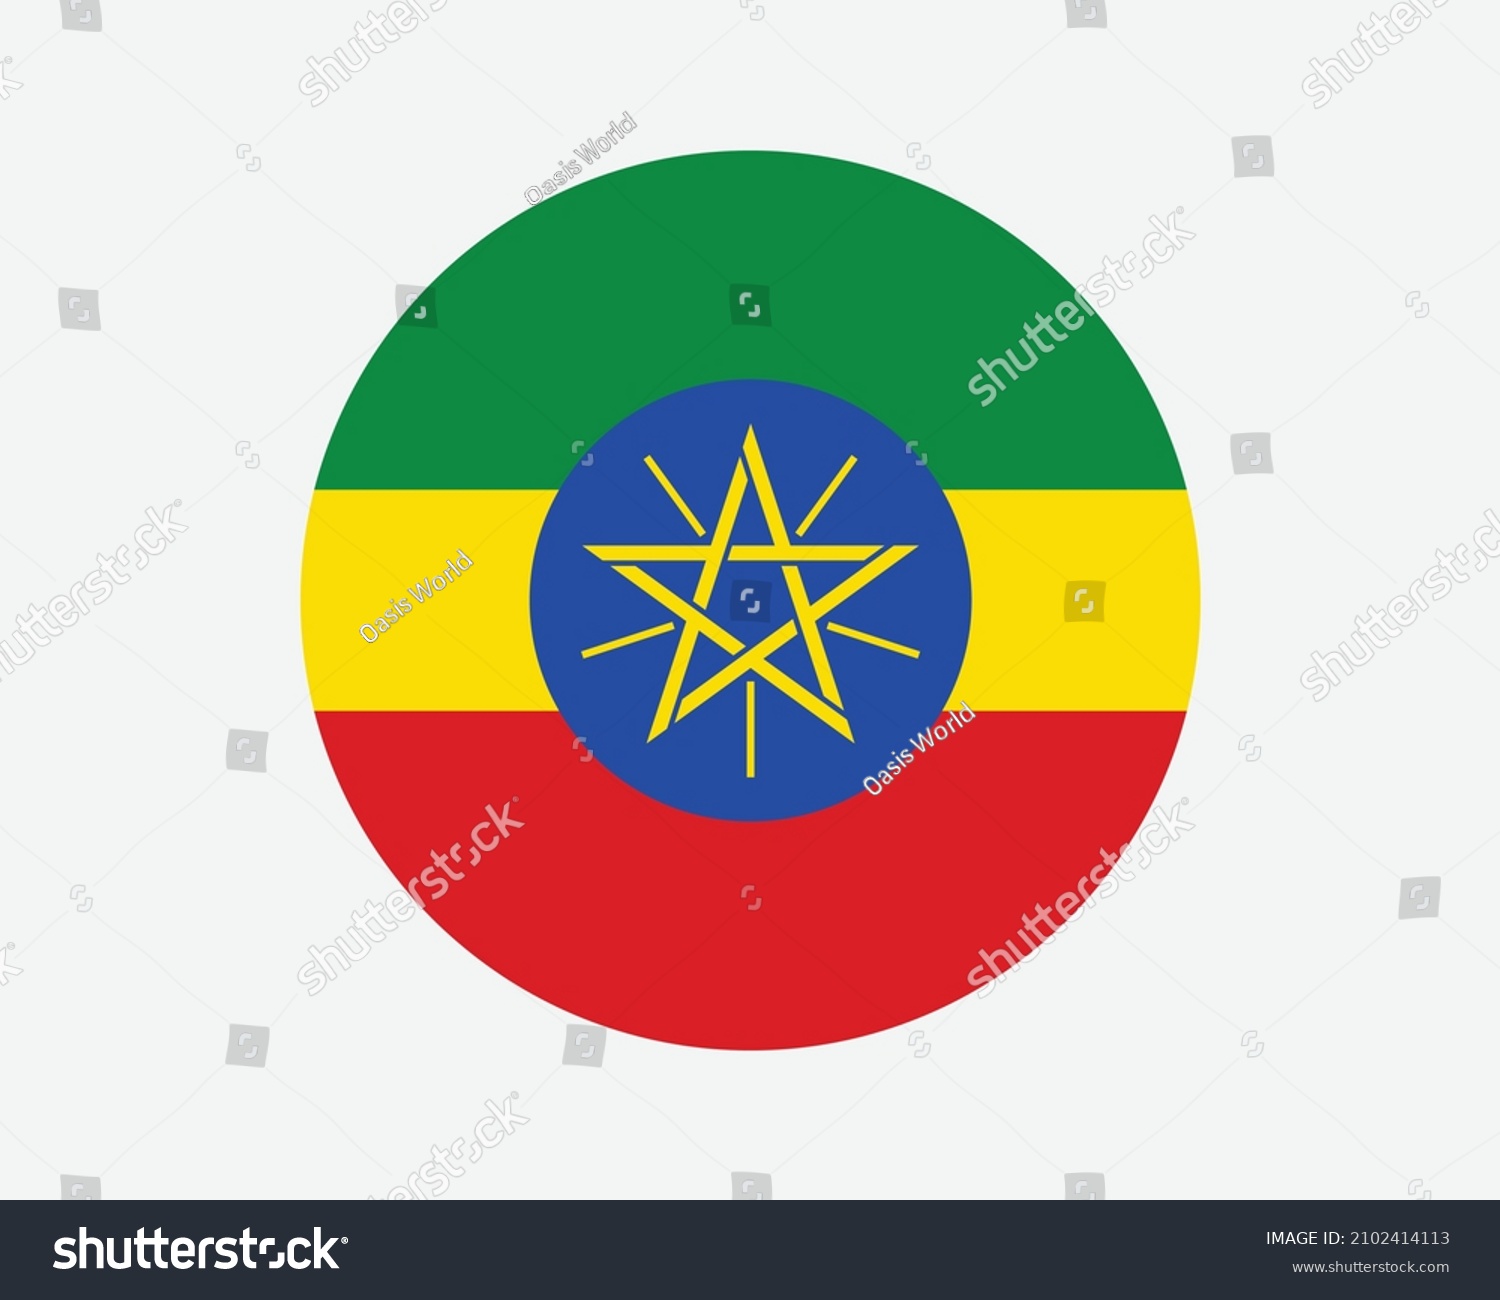 SVG of Ethiopia Round Country Flag. Circular Ethiopian National Flag. Federal Democratic Republic of Ethiopia Circle Shape Button Banner. EPS Vector Illustration. svg